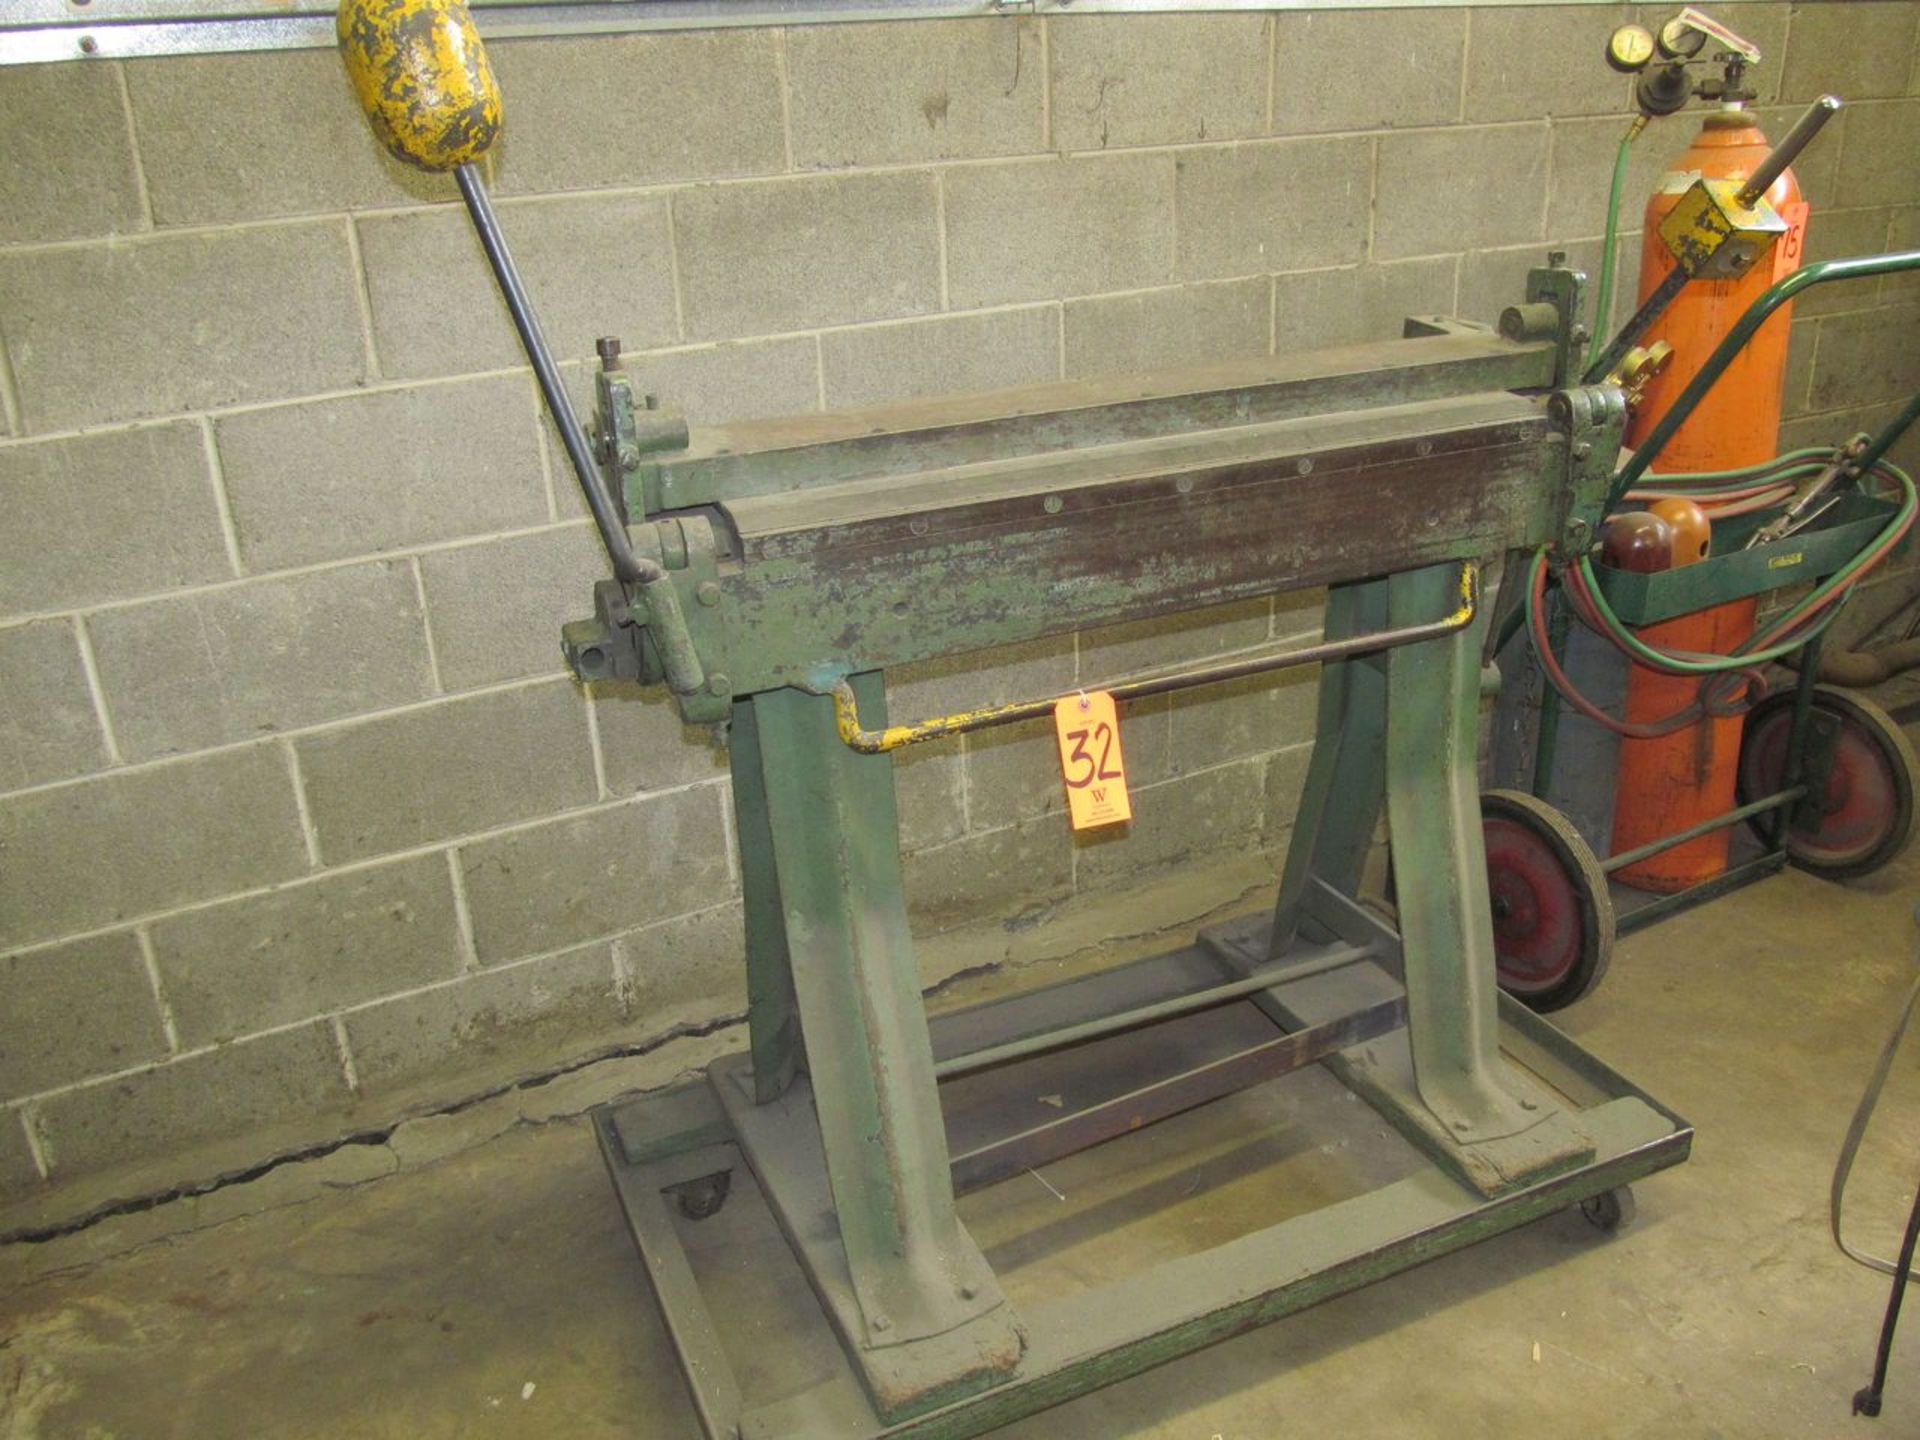 36 in. Apron / Flange Bender; on Portable Stand